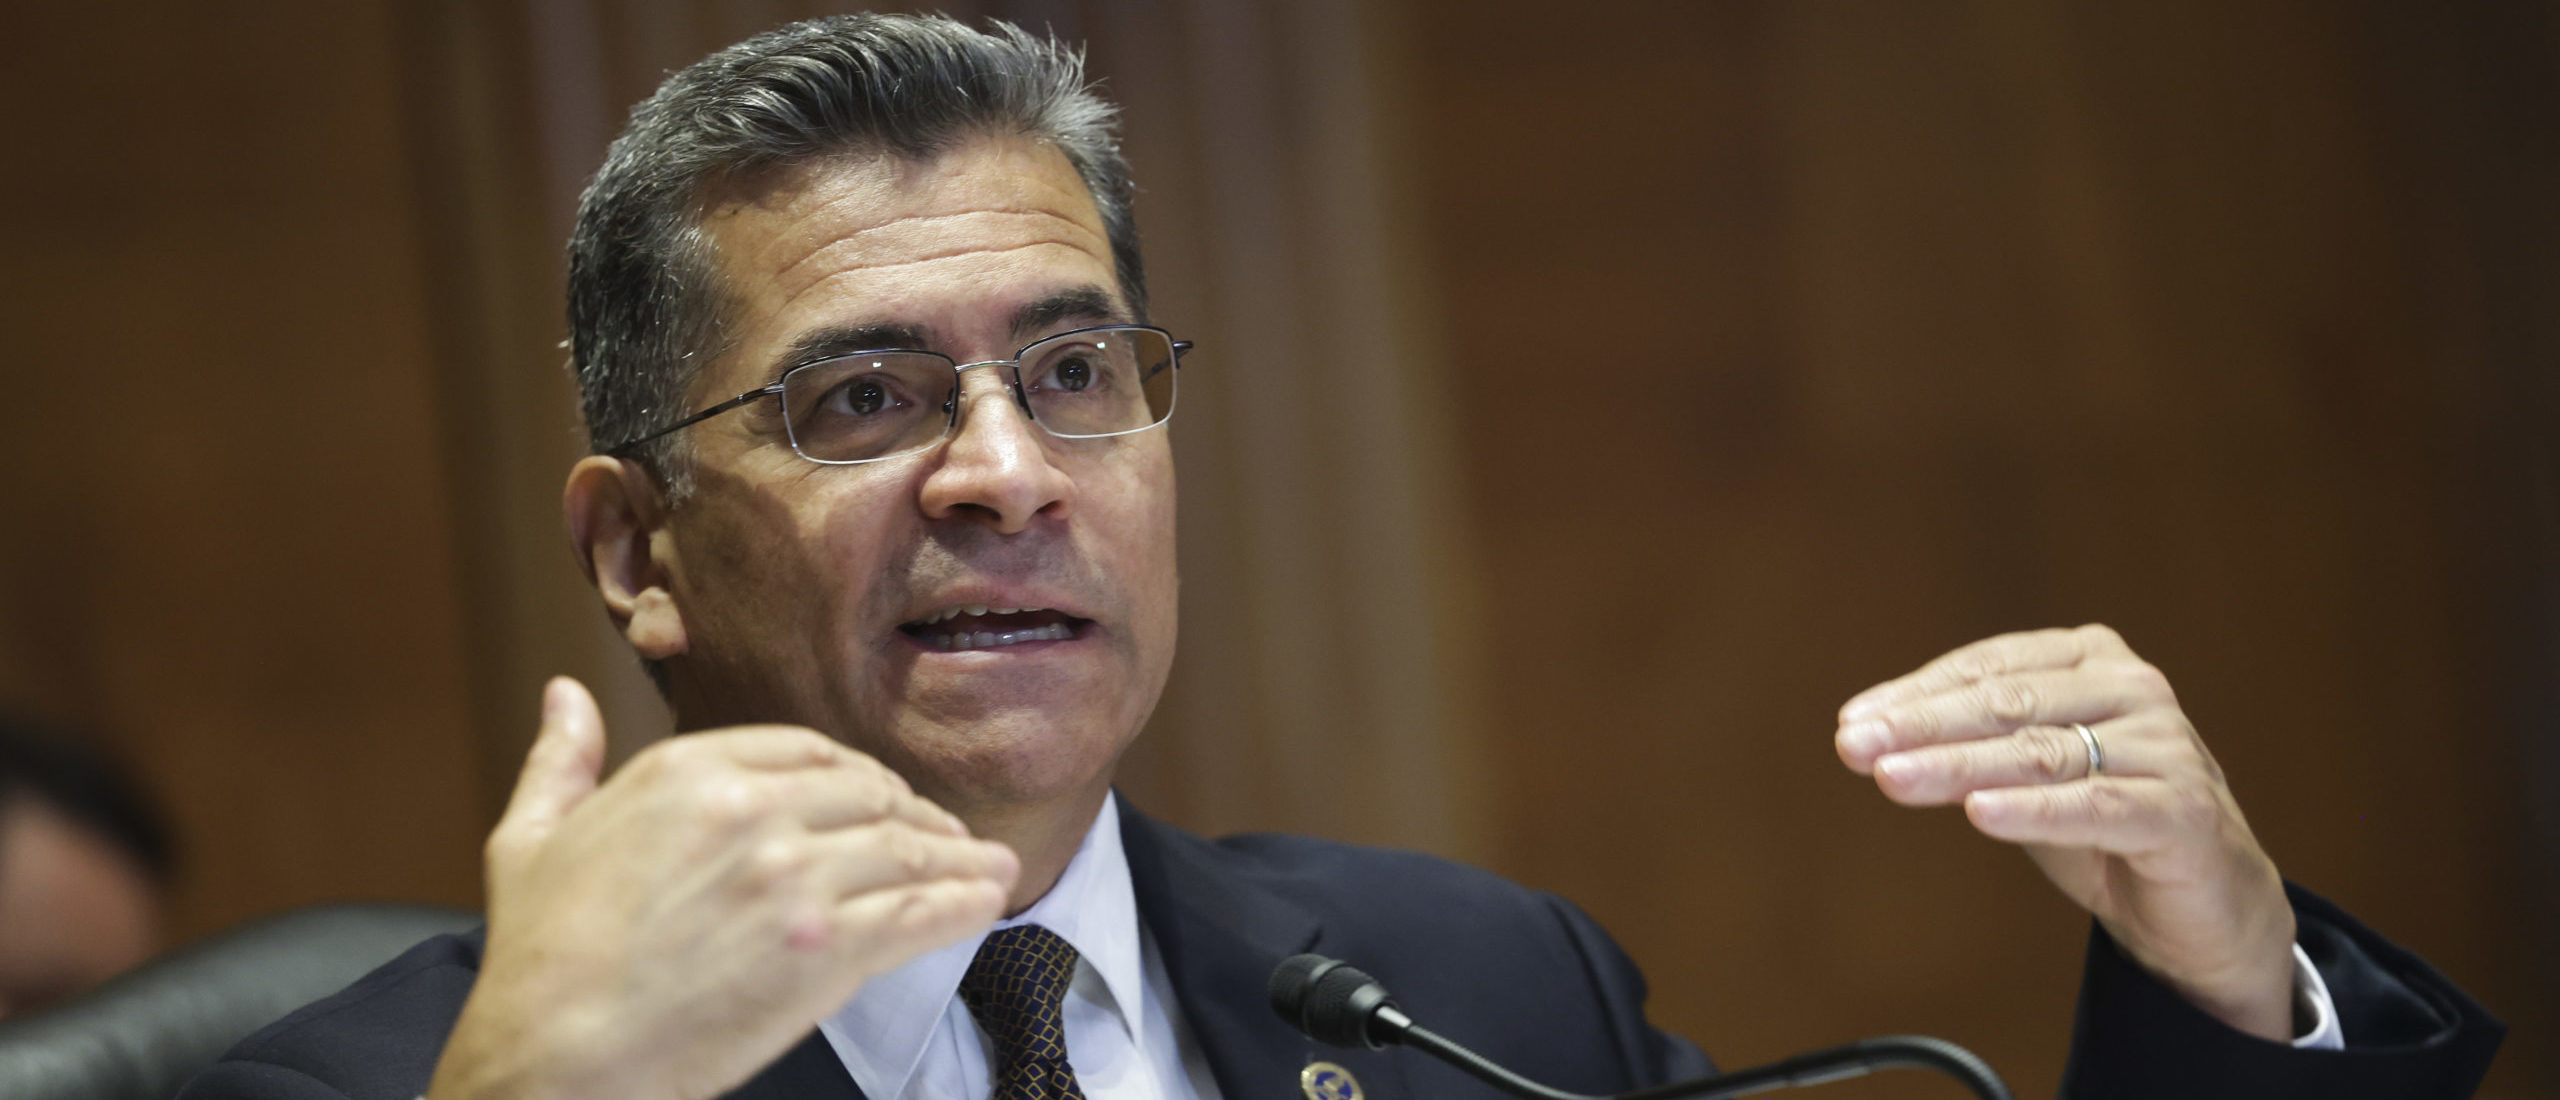 U.S. Secretary of the Department Of Health And Human Services (HHS) Xavier Becerra testifies before a Senate Appropriations Subcommittee, on Capitol Hill, May 04, 2022 in Washington, DC. (Photo by Kevin Dietsch/Getty Images)